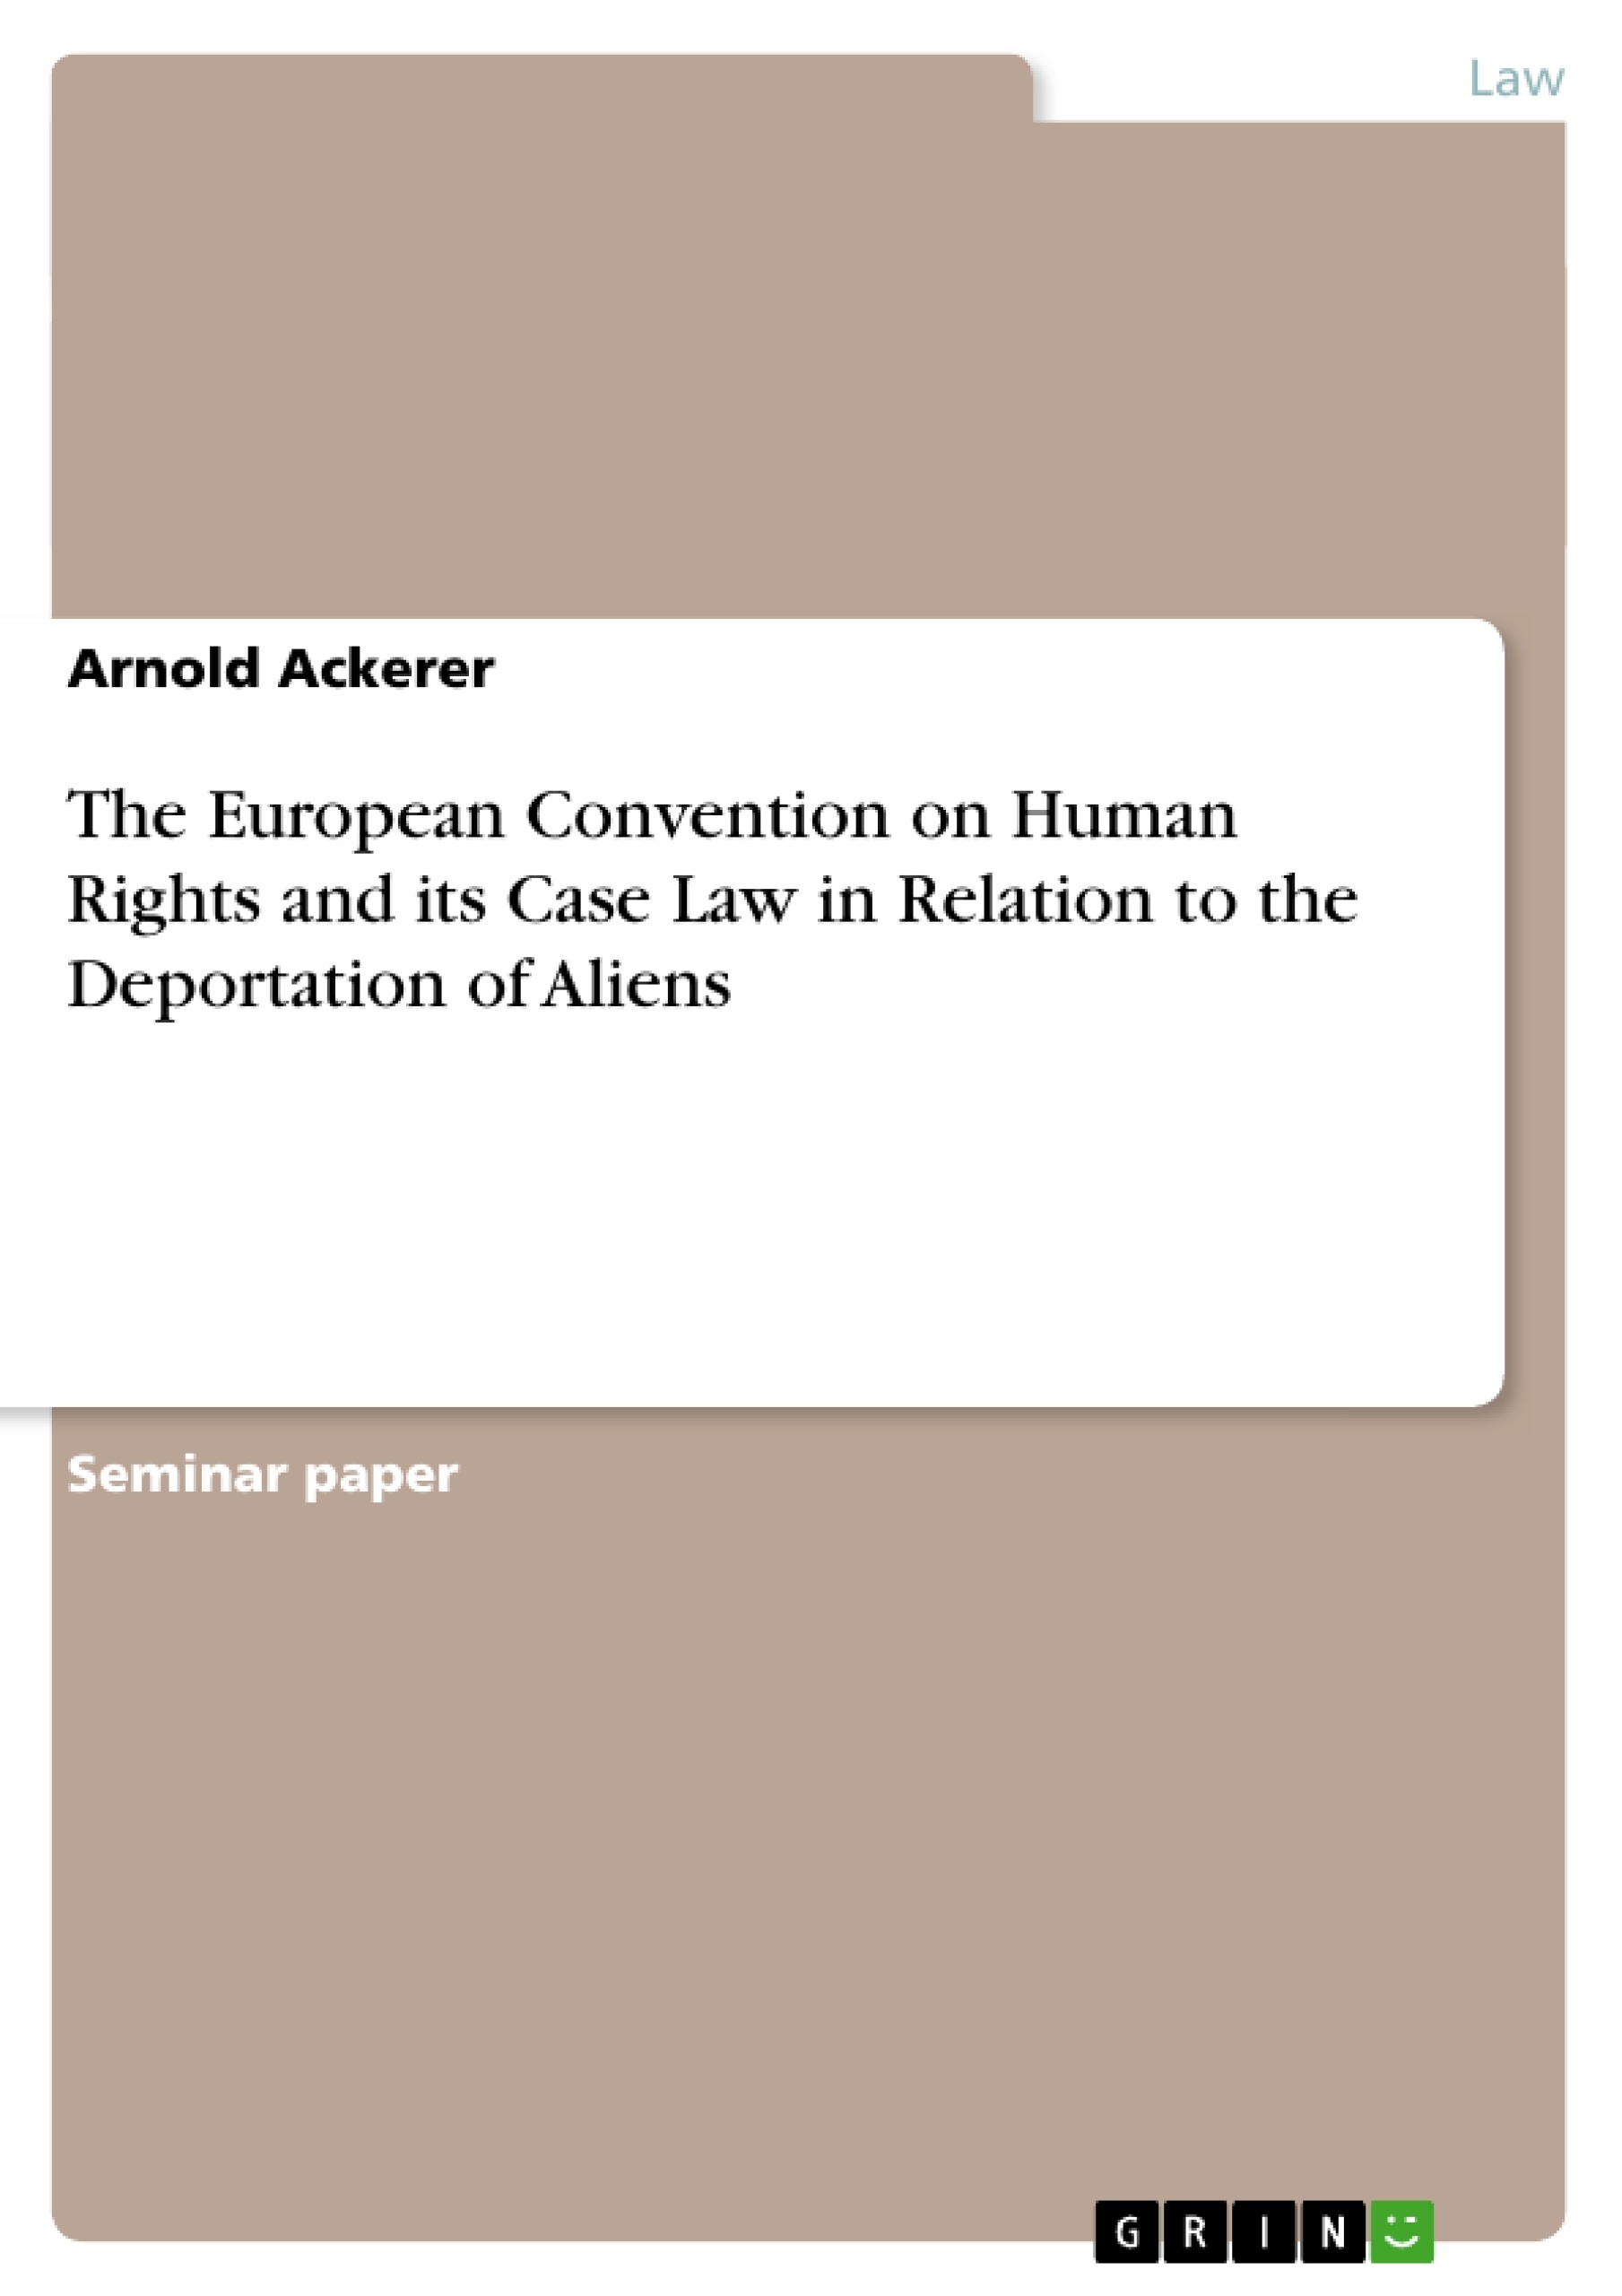 Title: The European Convention on Human Rights and its Case Law in Relation to the Deportation of Aliens